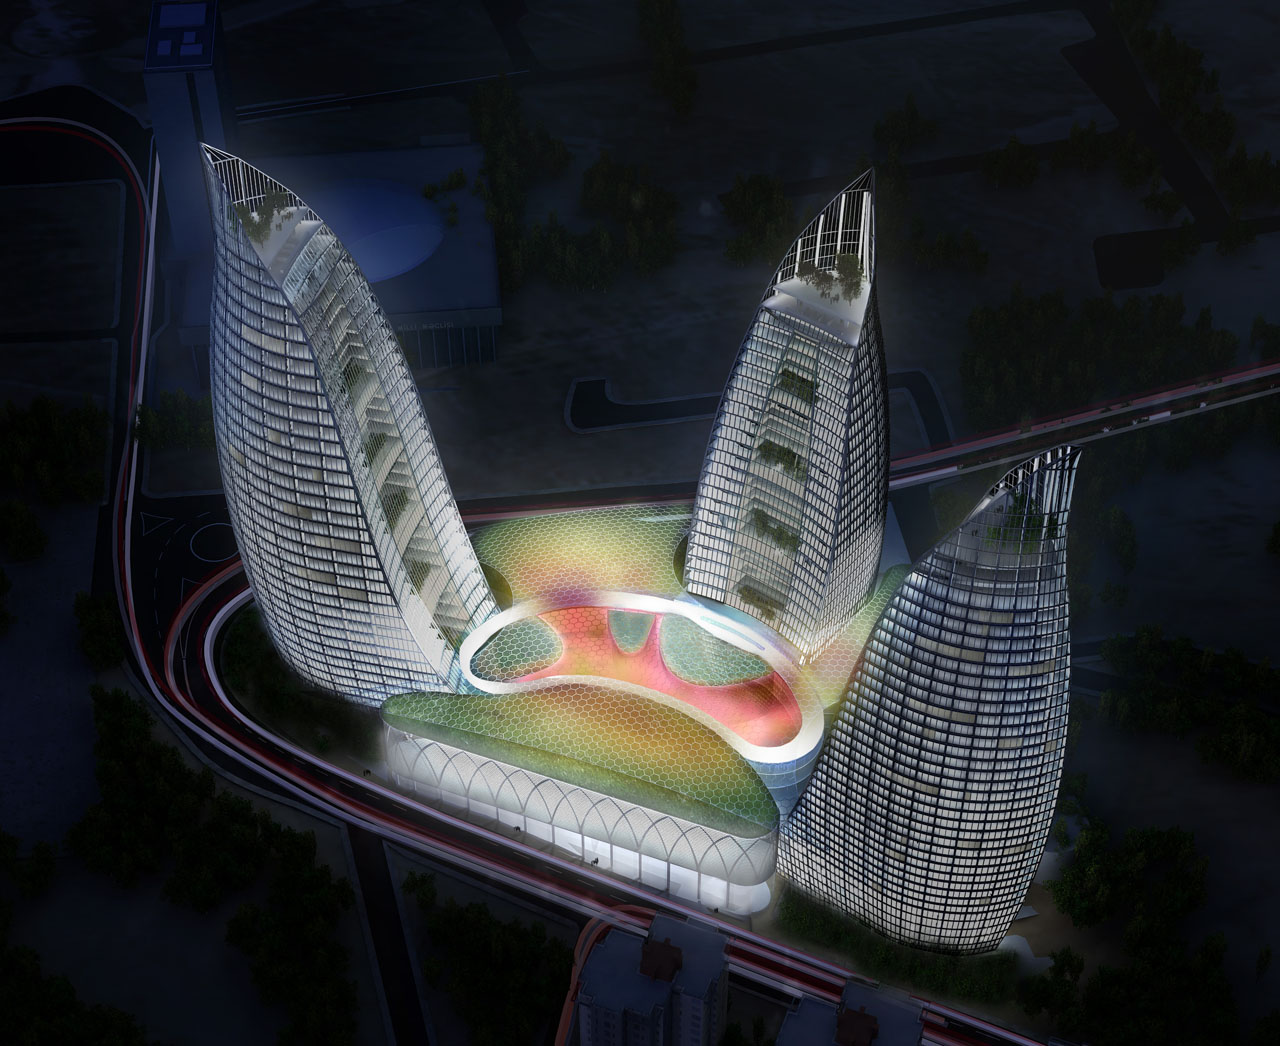 Rendering of the Baku Flame Towers project designed by HOK